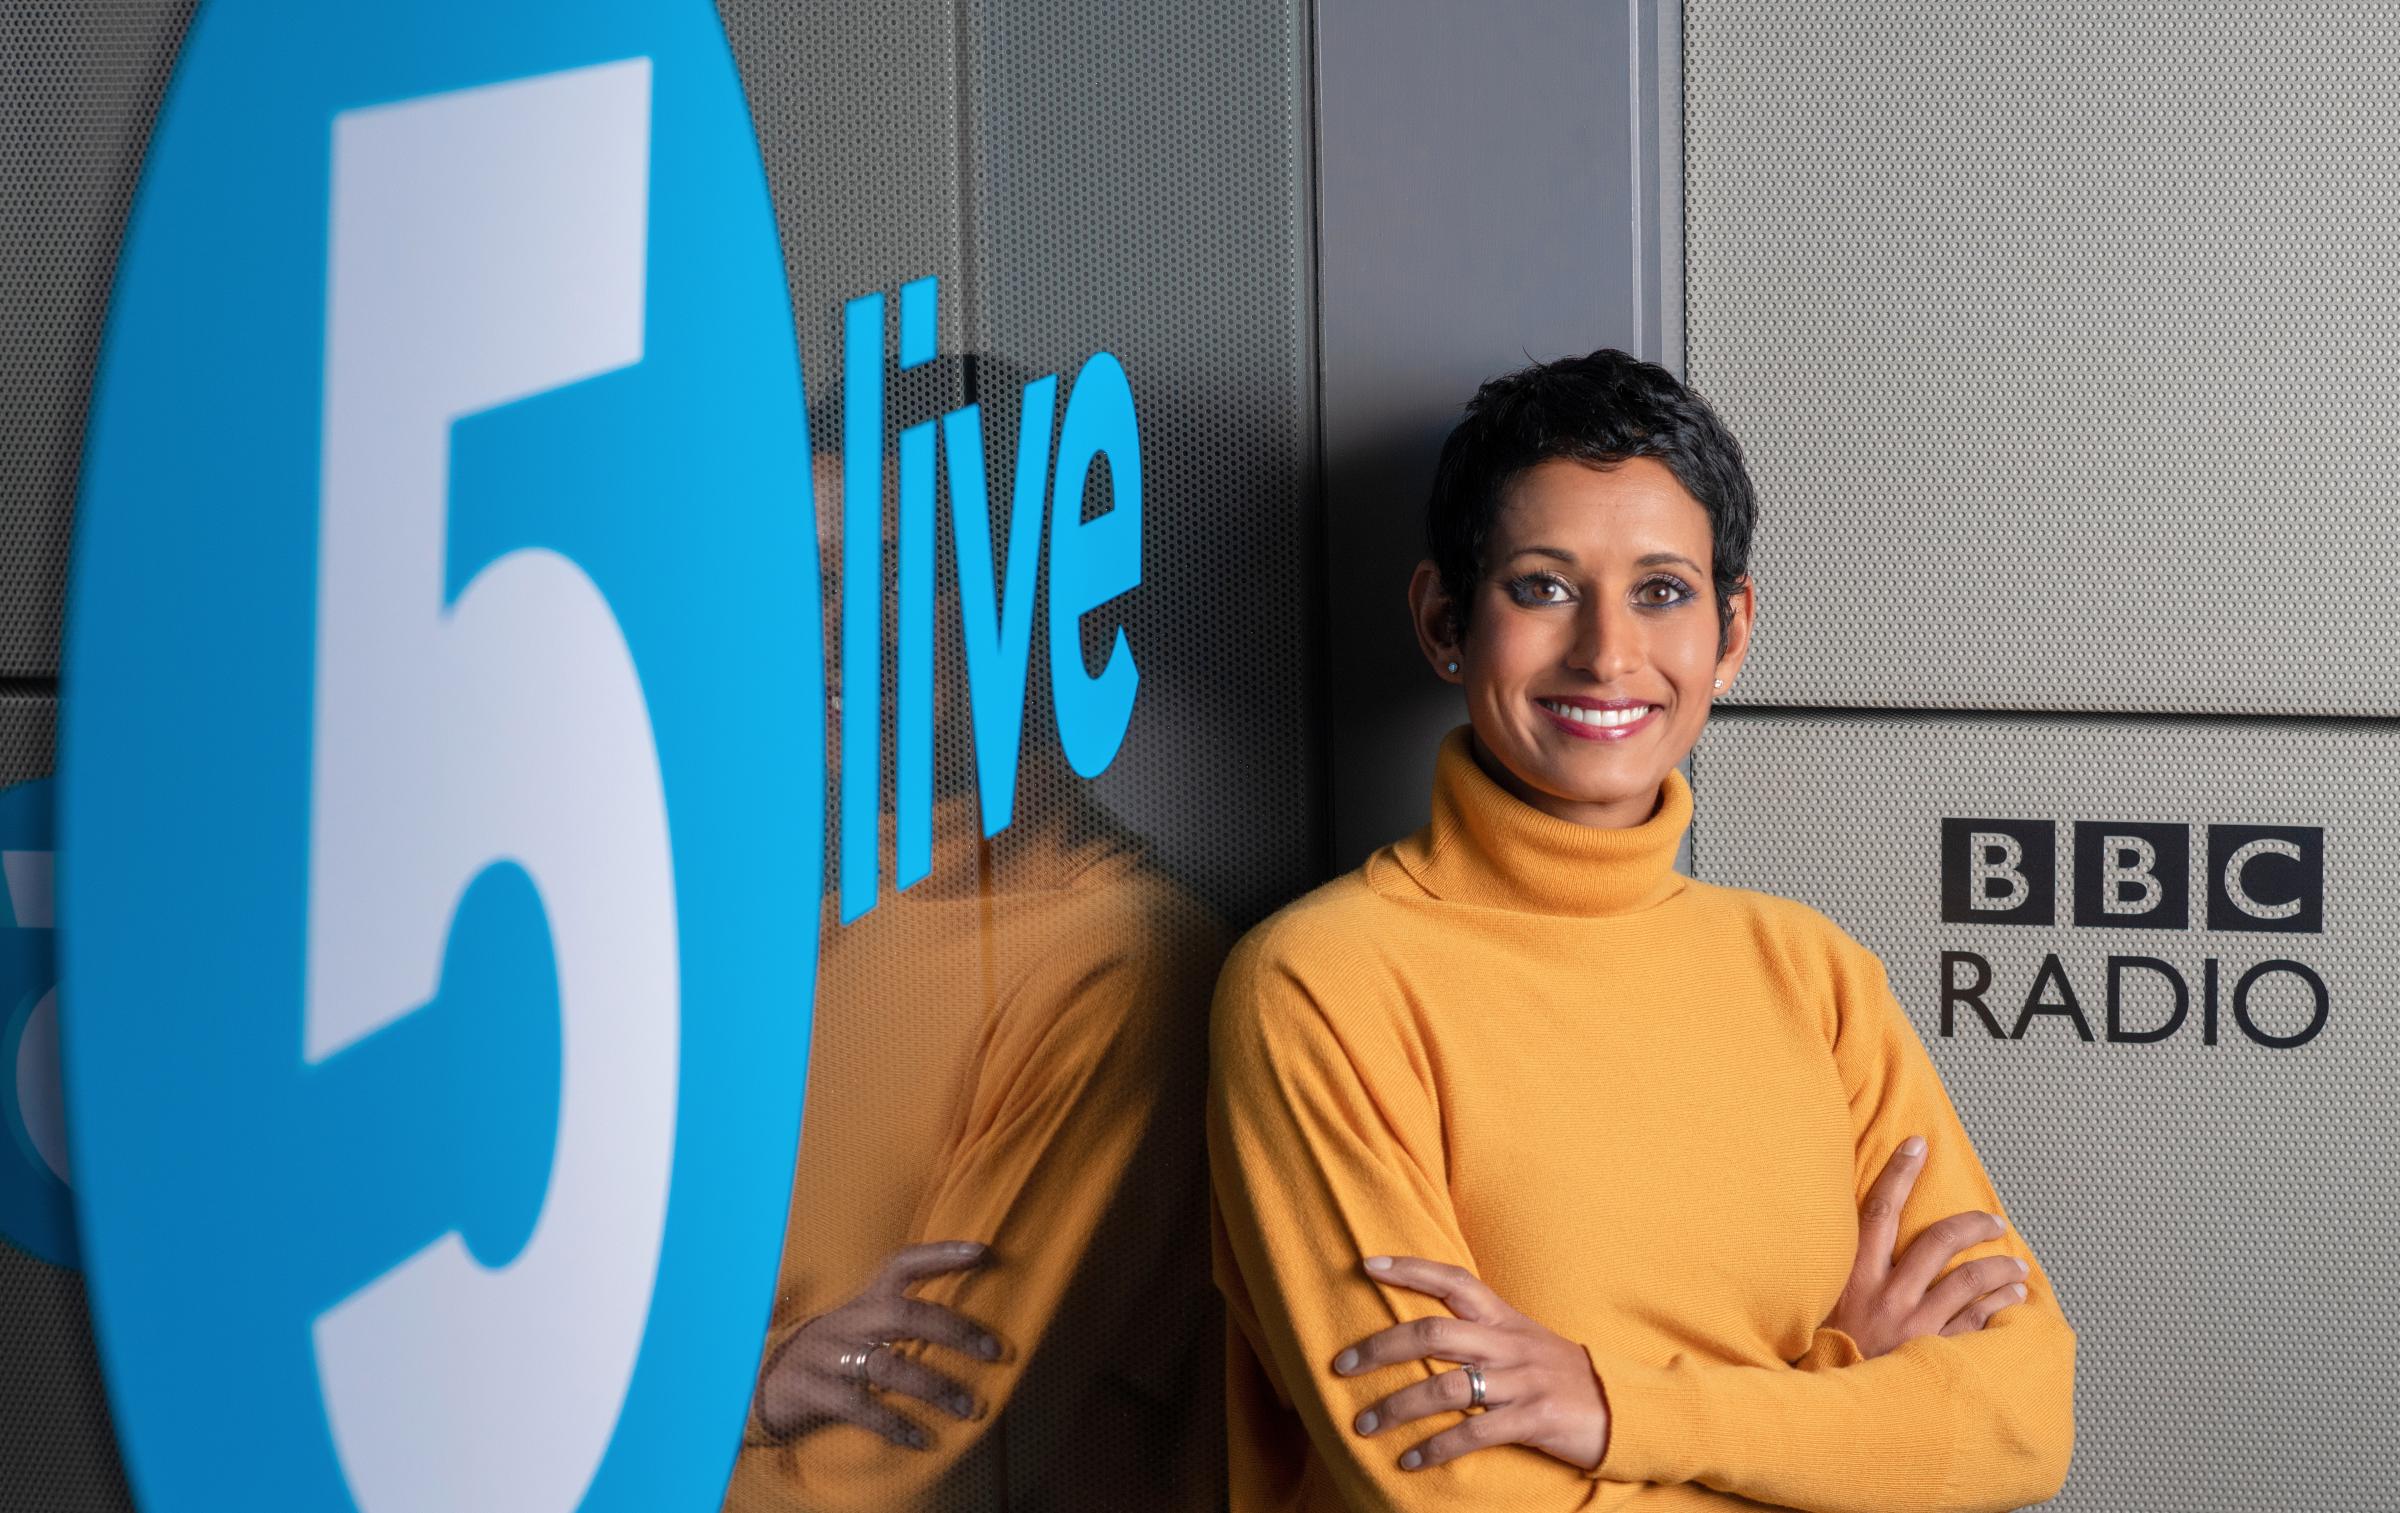 For use in UK, Ireland or Benelux countries only Undated BBC handout photo of Naga Munchetty, who has said she was absolutely delighted as she made her debut as the host of the mid-morning programme on BBC Radio 5 Live on Monday.